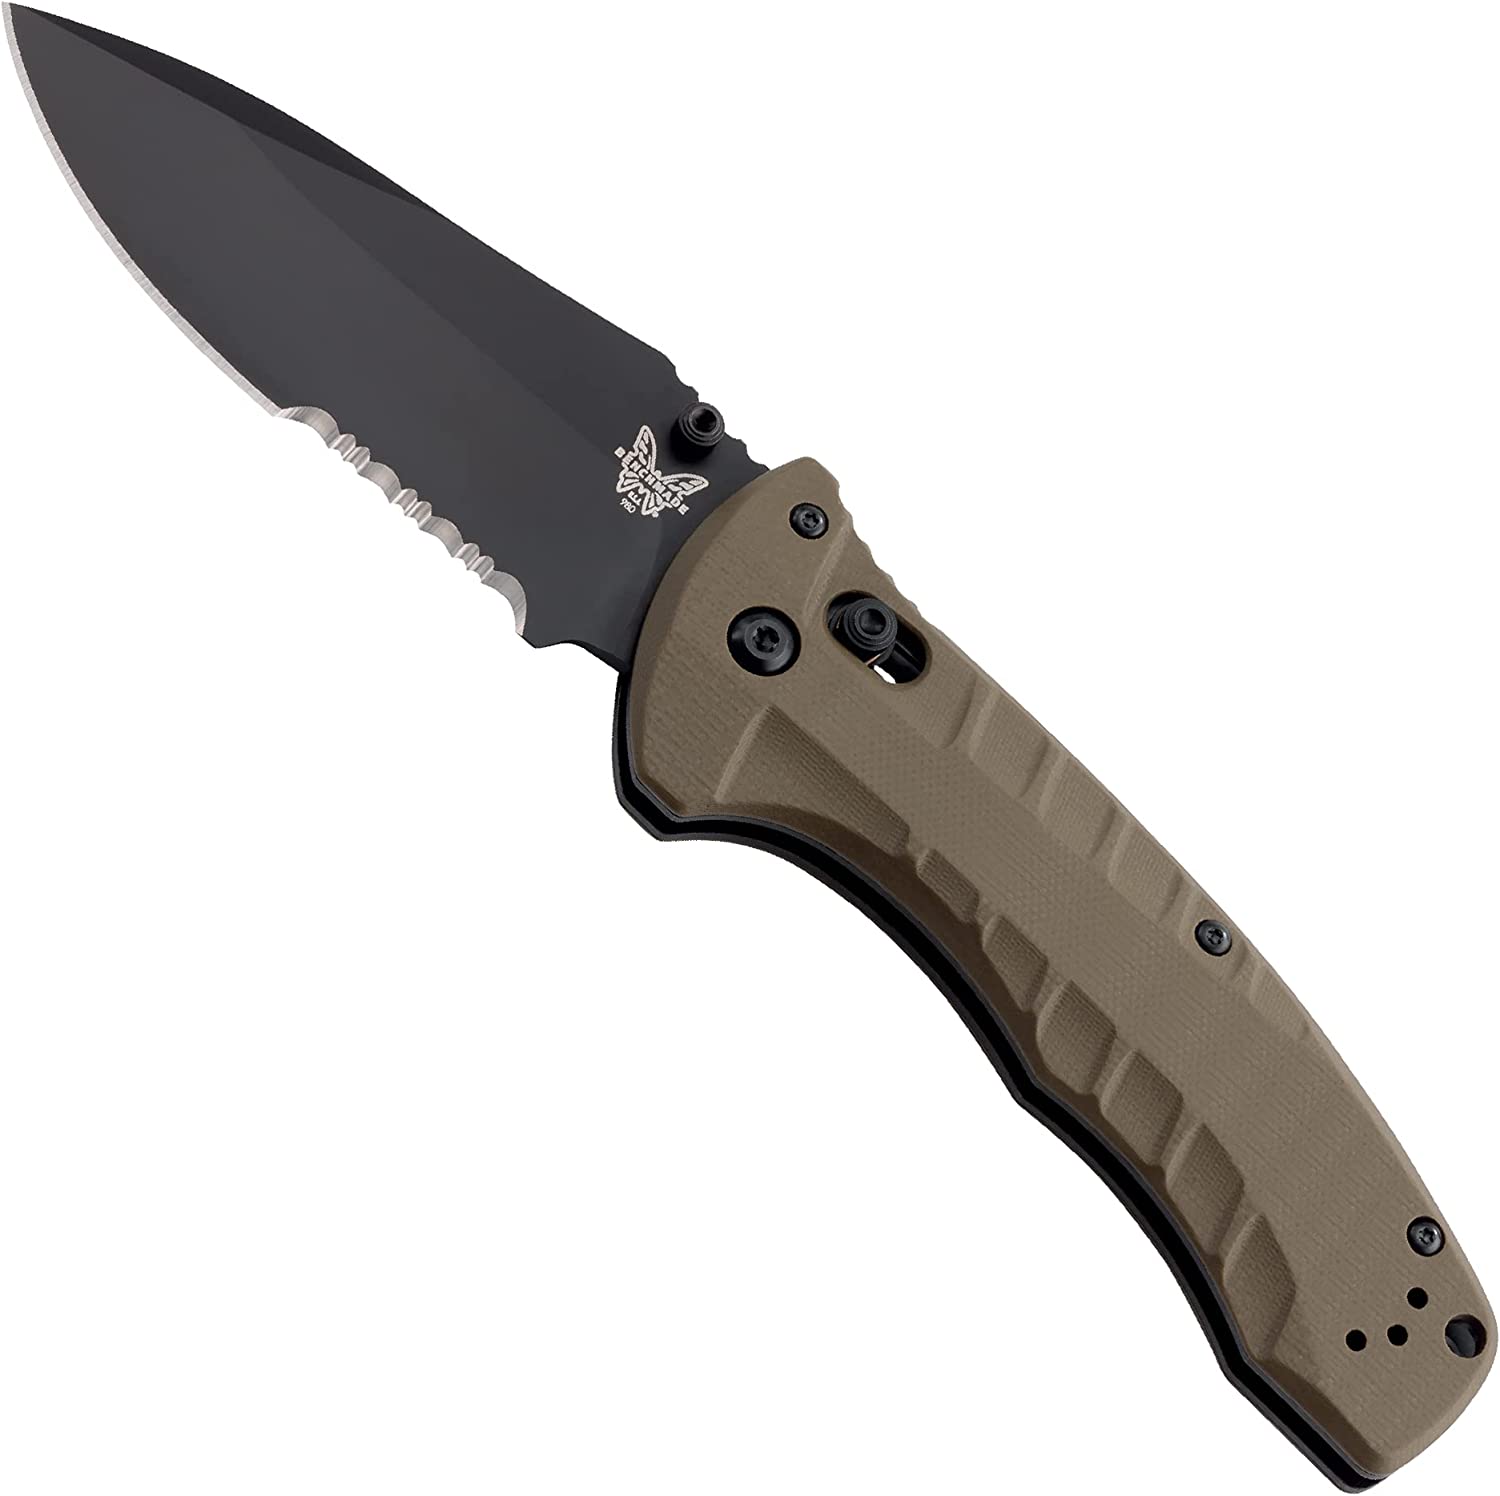 Benchmade – Turret 980, EDC Folding Knife, Drop-Point Blade, Manual Open, Axis Locking Mechanism, Made in USA, Coated, Serrated, 980SBK Turret